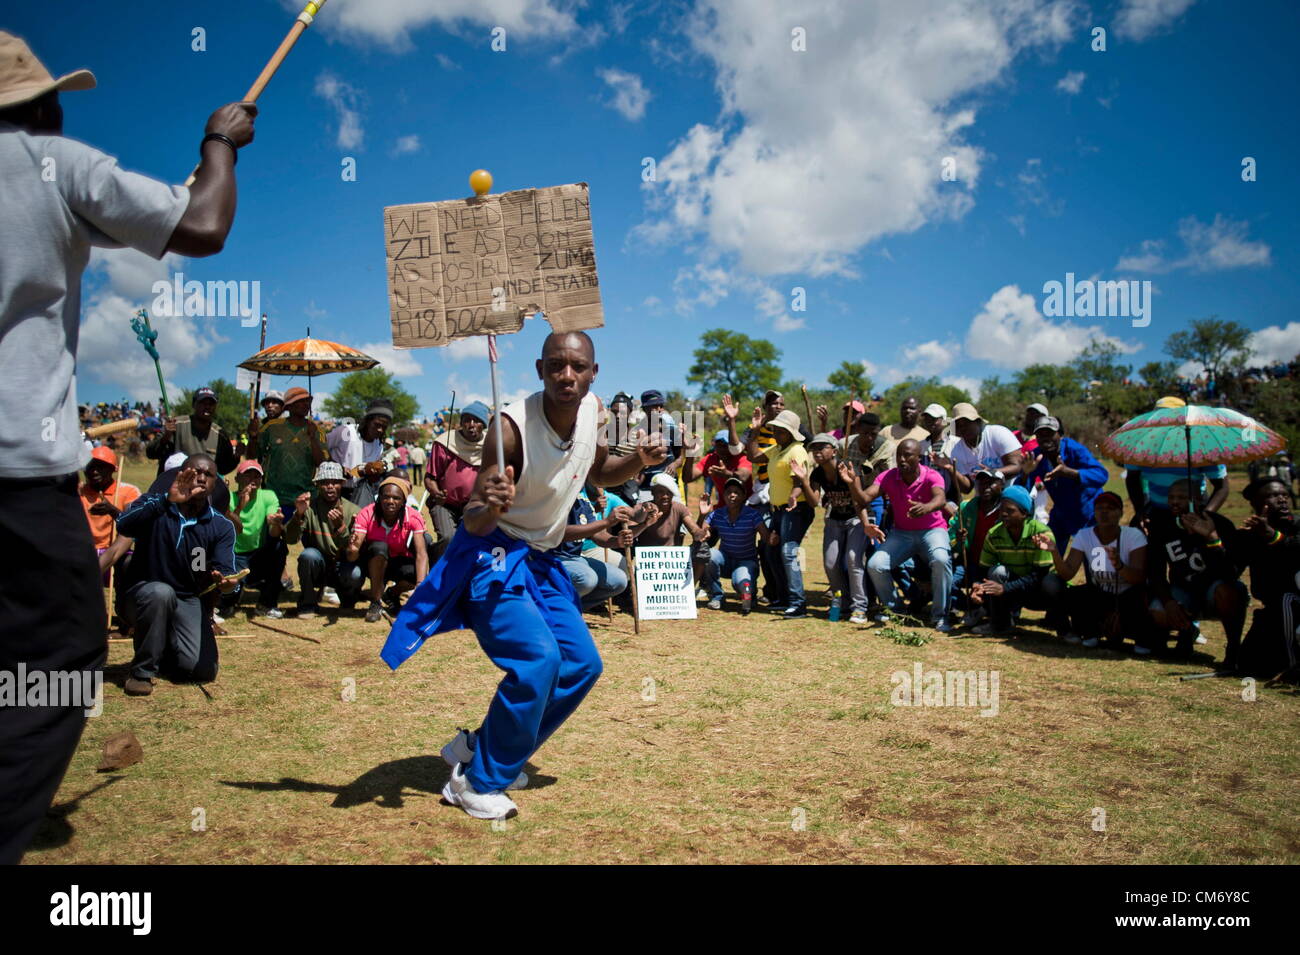 CARLETONVILLE, SOUTH AFRICA: Hundreds of striking gold miners gather at Goldfields KDC West Mine on October 18, 2012 in Carletonville, South Africa. Mine management is planning to start with disciplinary hearings for those miners involved in the illegal strike. (Photo by Gallo Images / Foto24 / Cornel van Heerden) Stock Photo